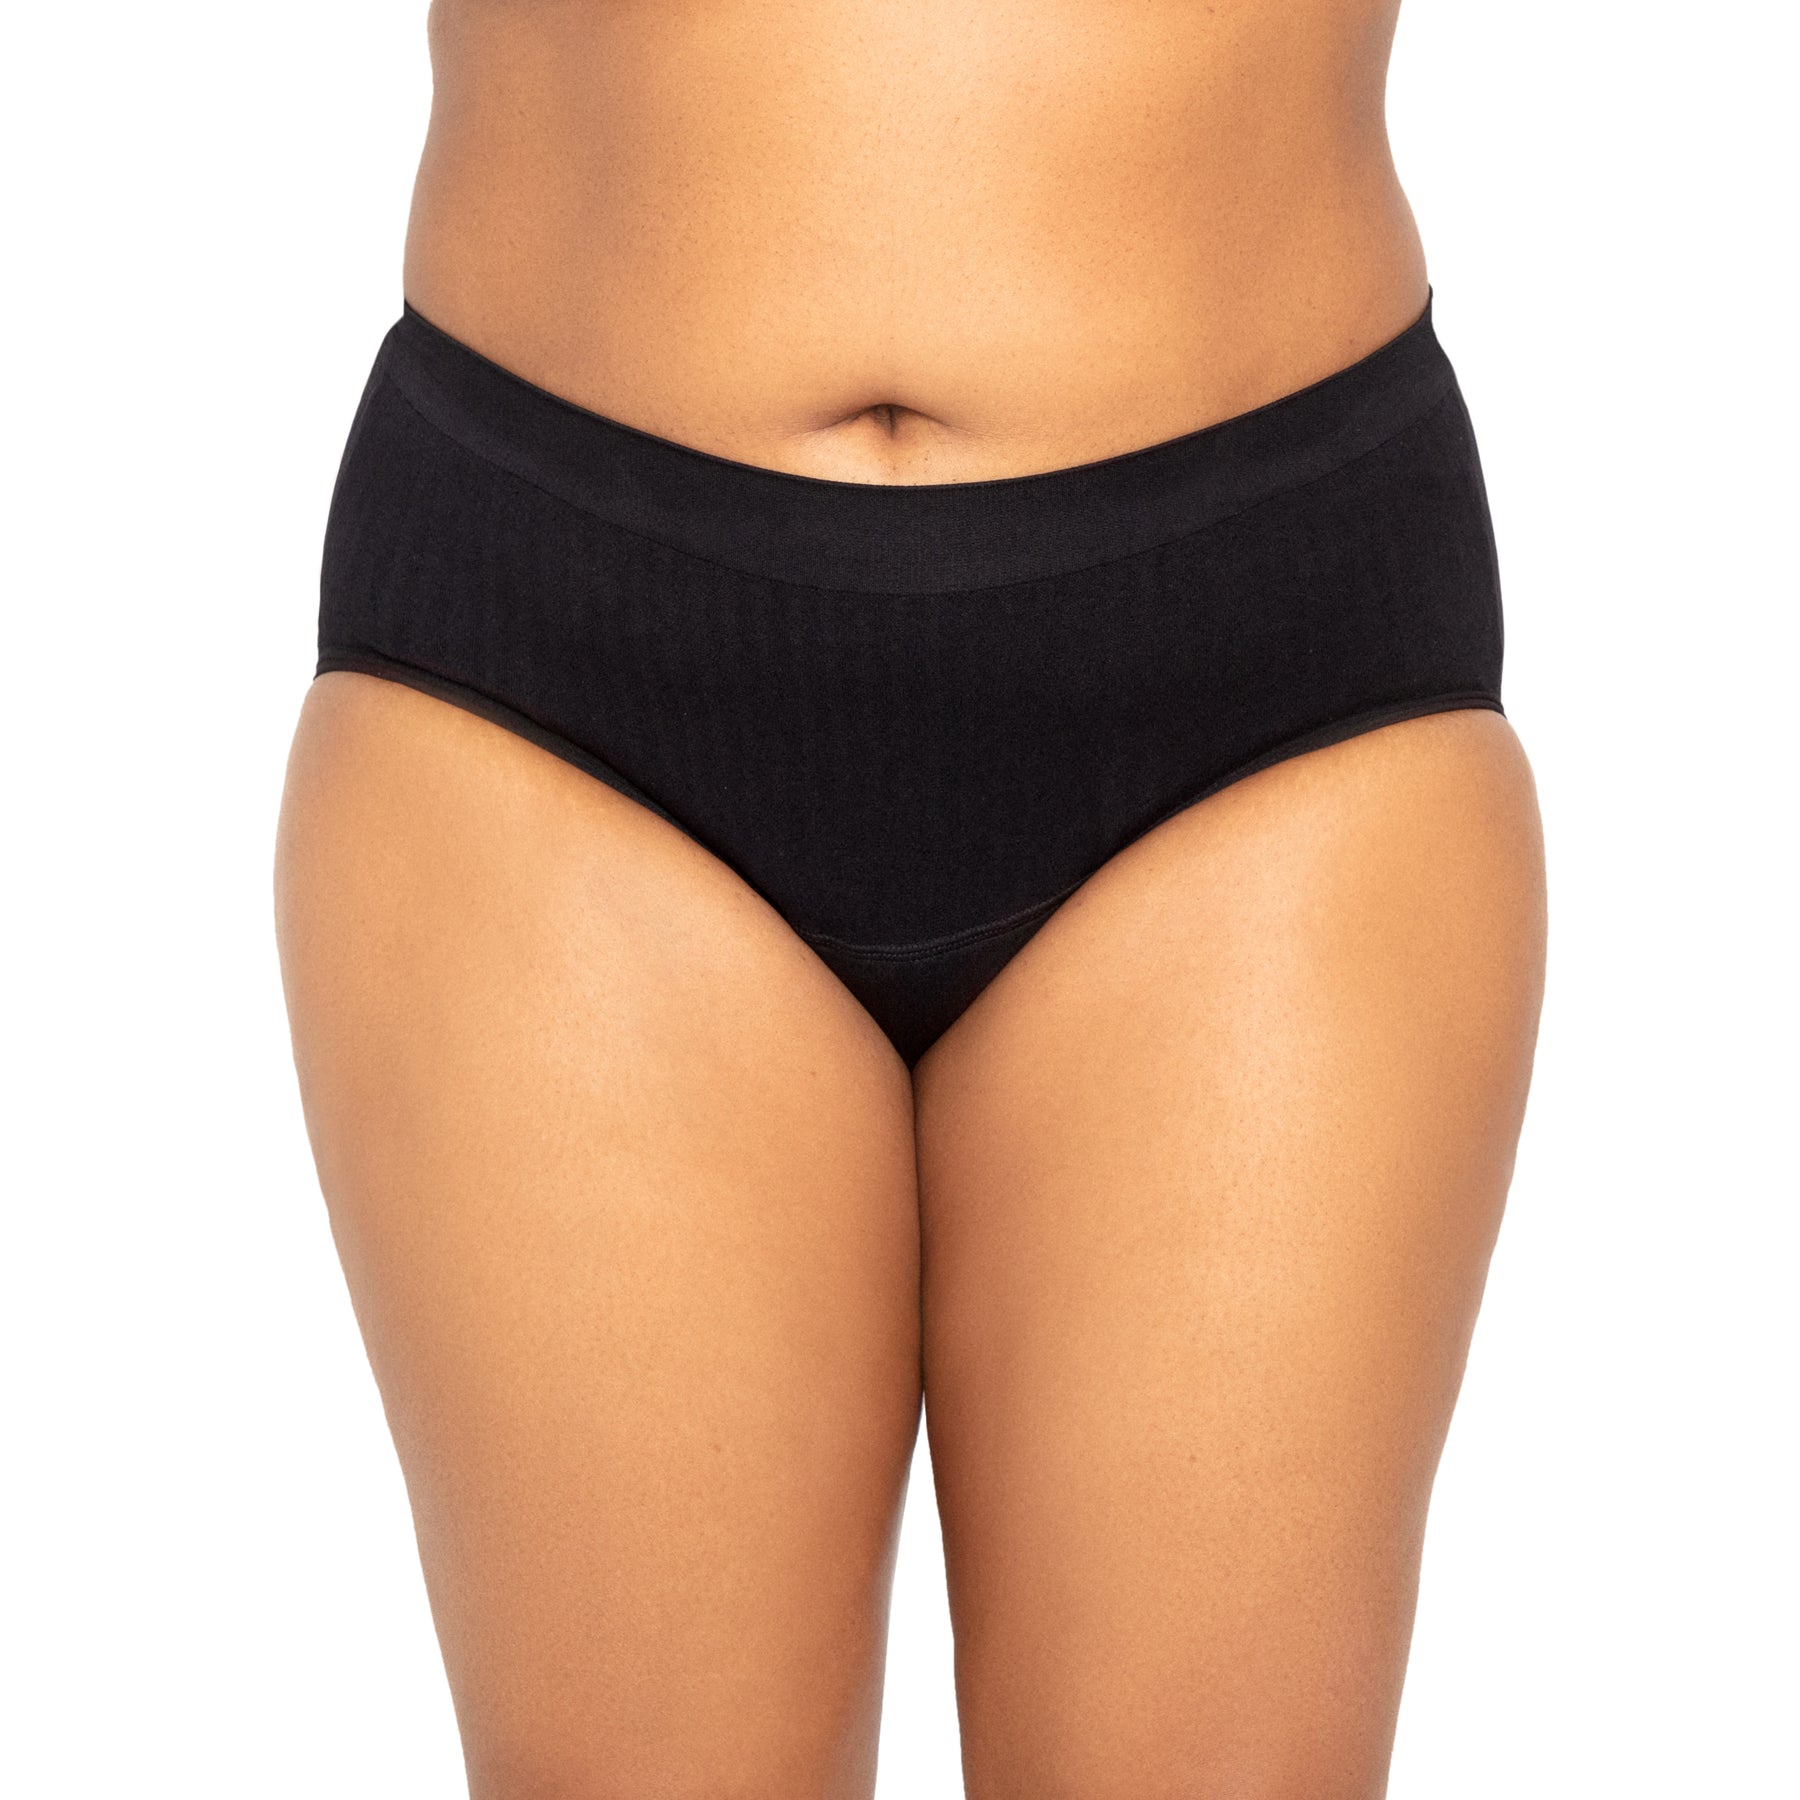 The Period Company. The Thong Period. in Sporty Stretch for Light